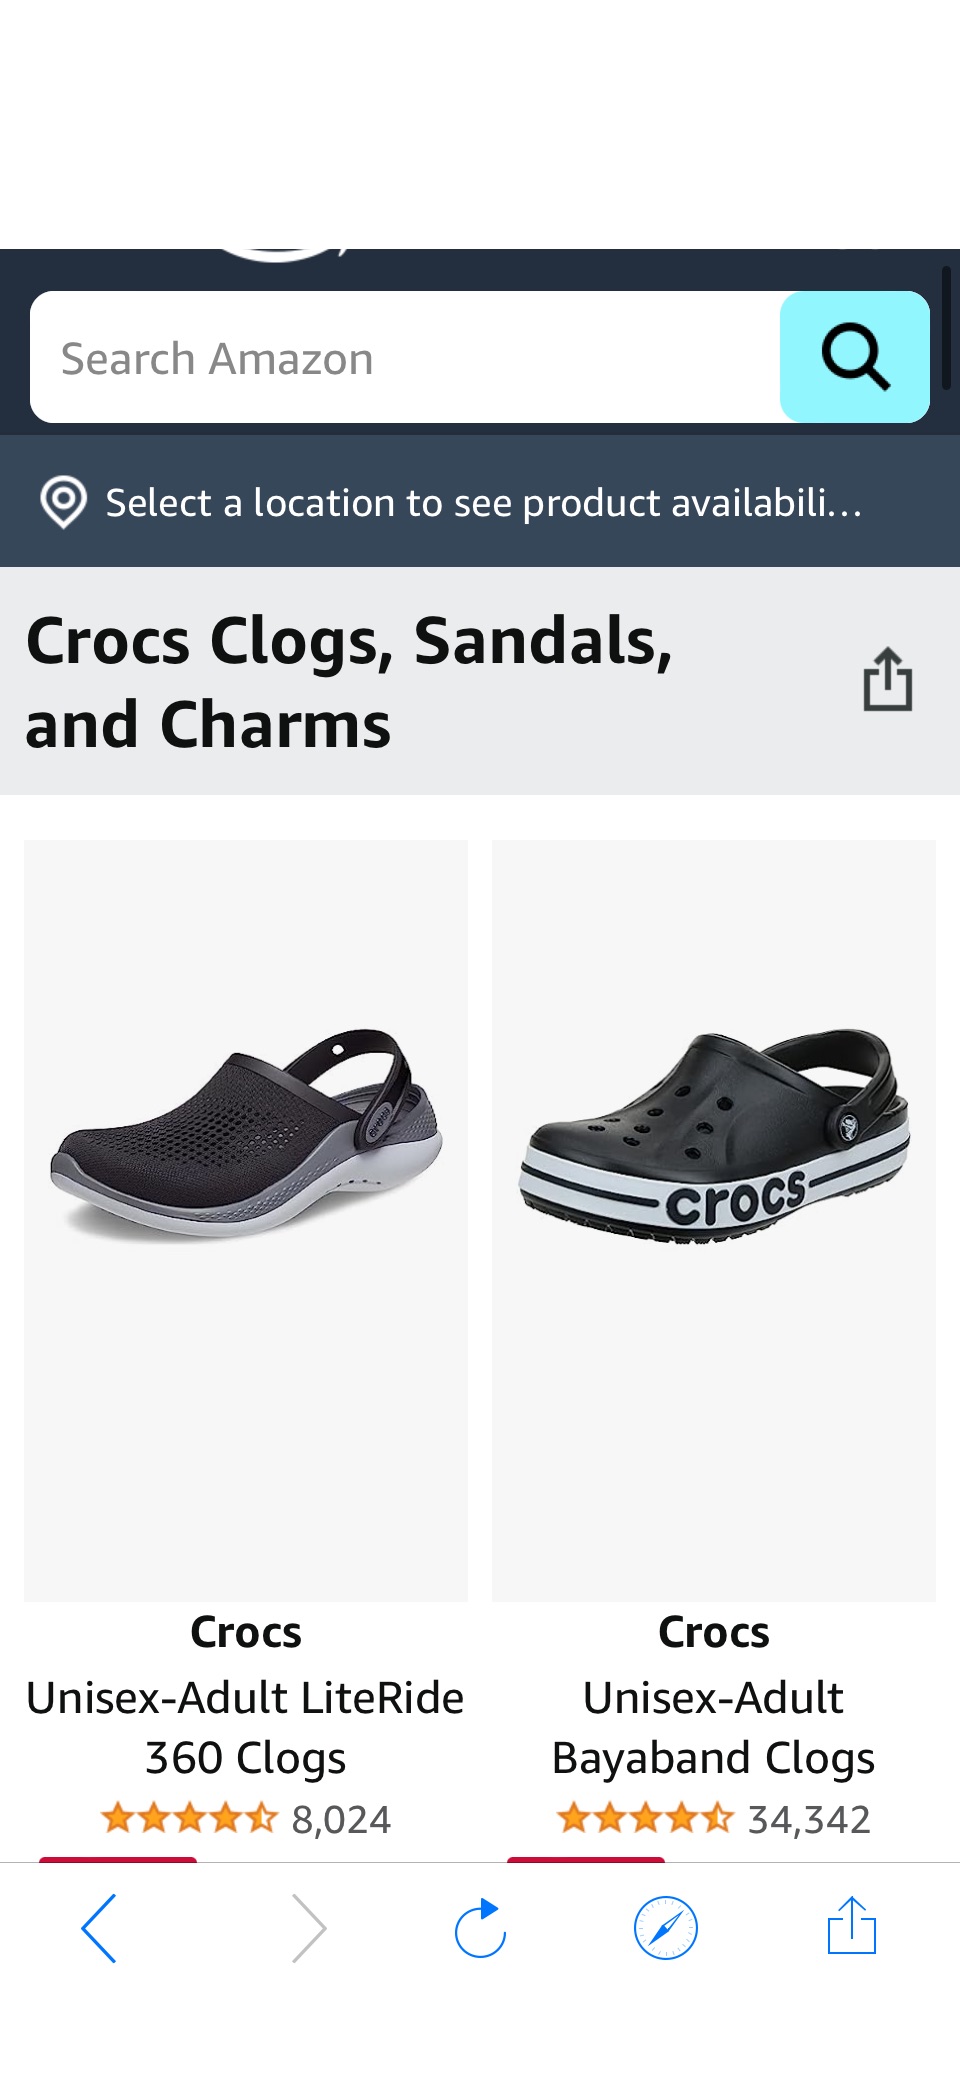 Crocs Clogs, Sandals, and Charms促销9.09起